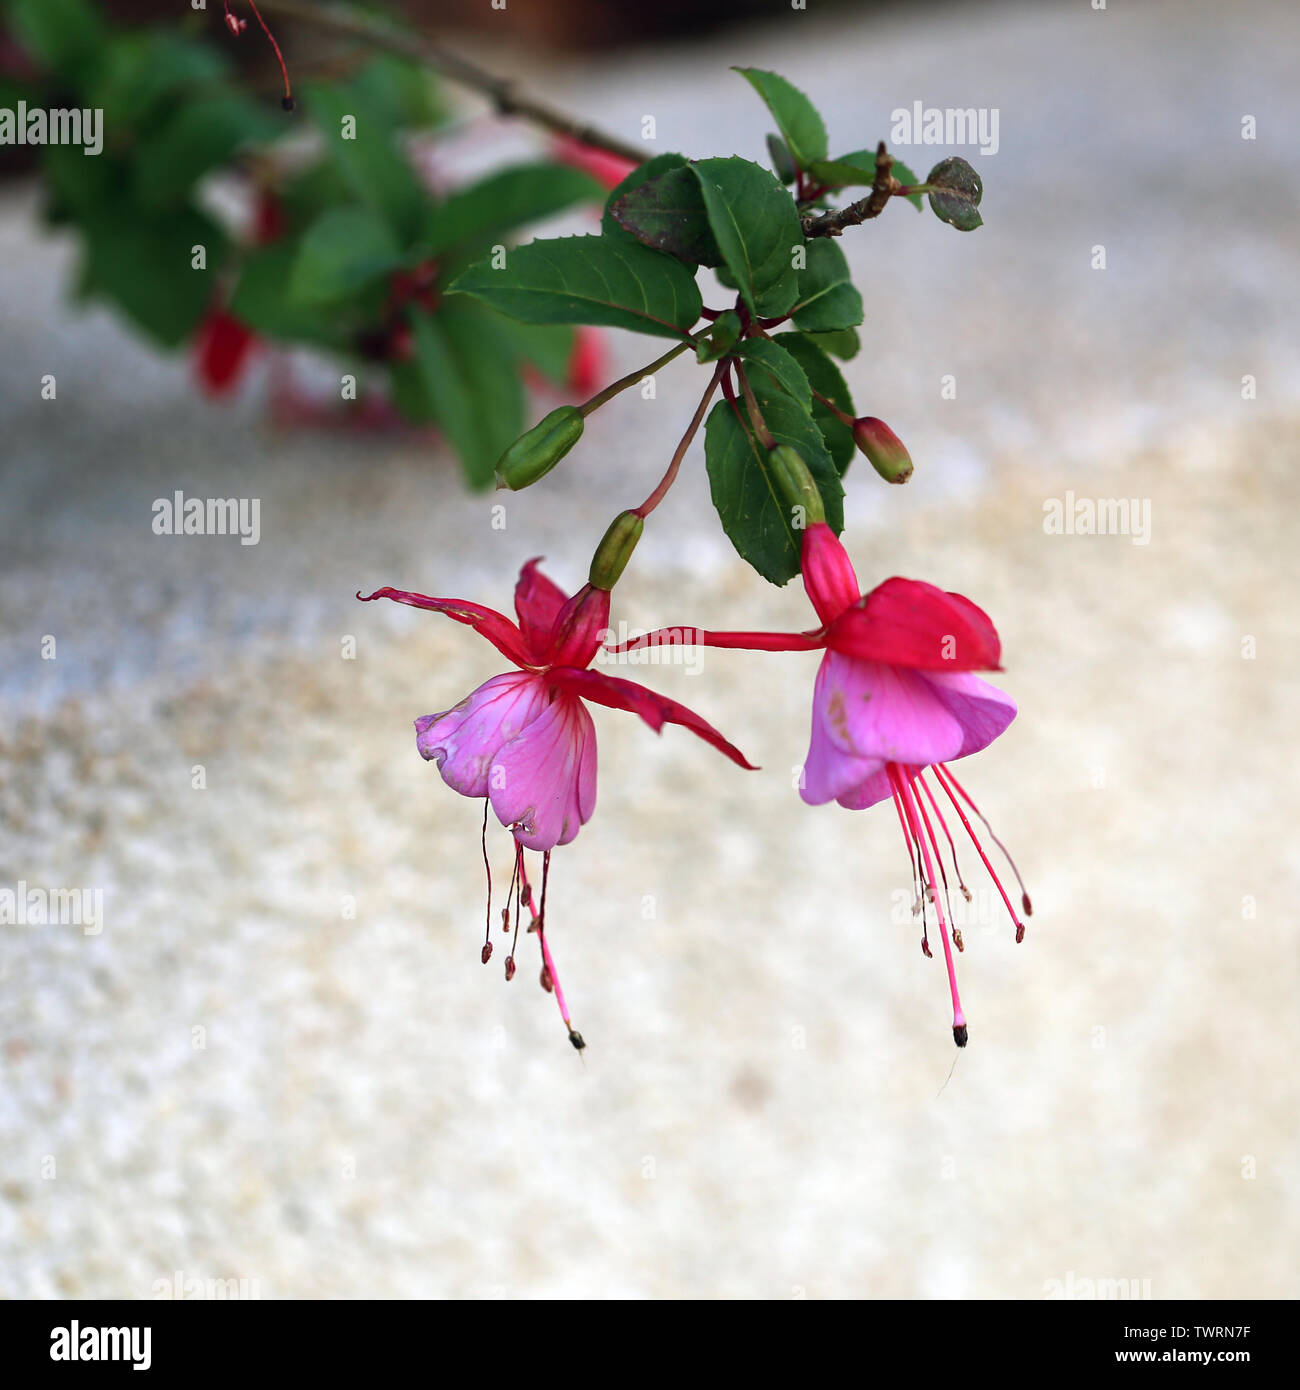 Pink fuchsia flowers in a macro image. Multiple pink flowers surrounded with some green leaves photographed during a sunny spring day in Madeira. Stock Photo